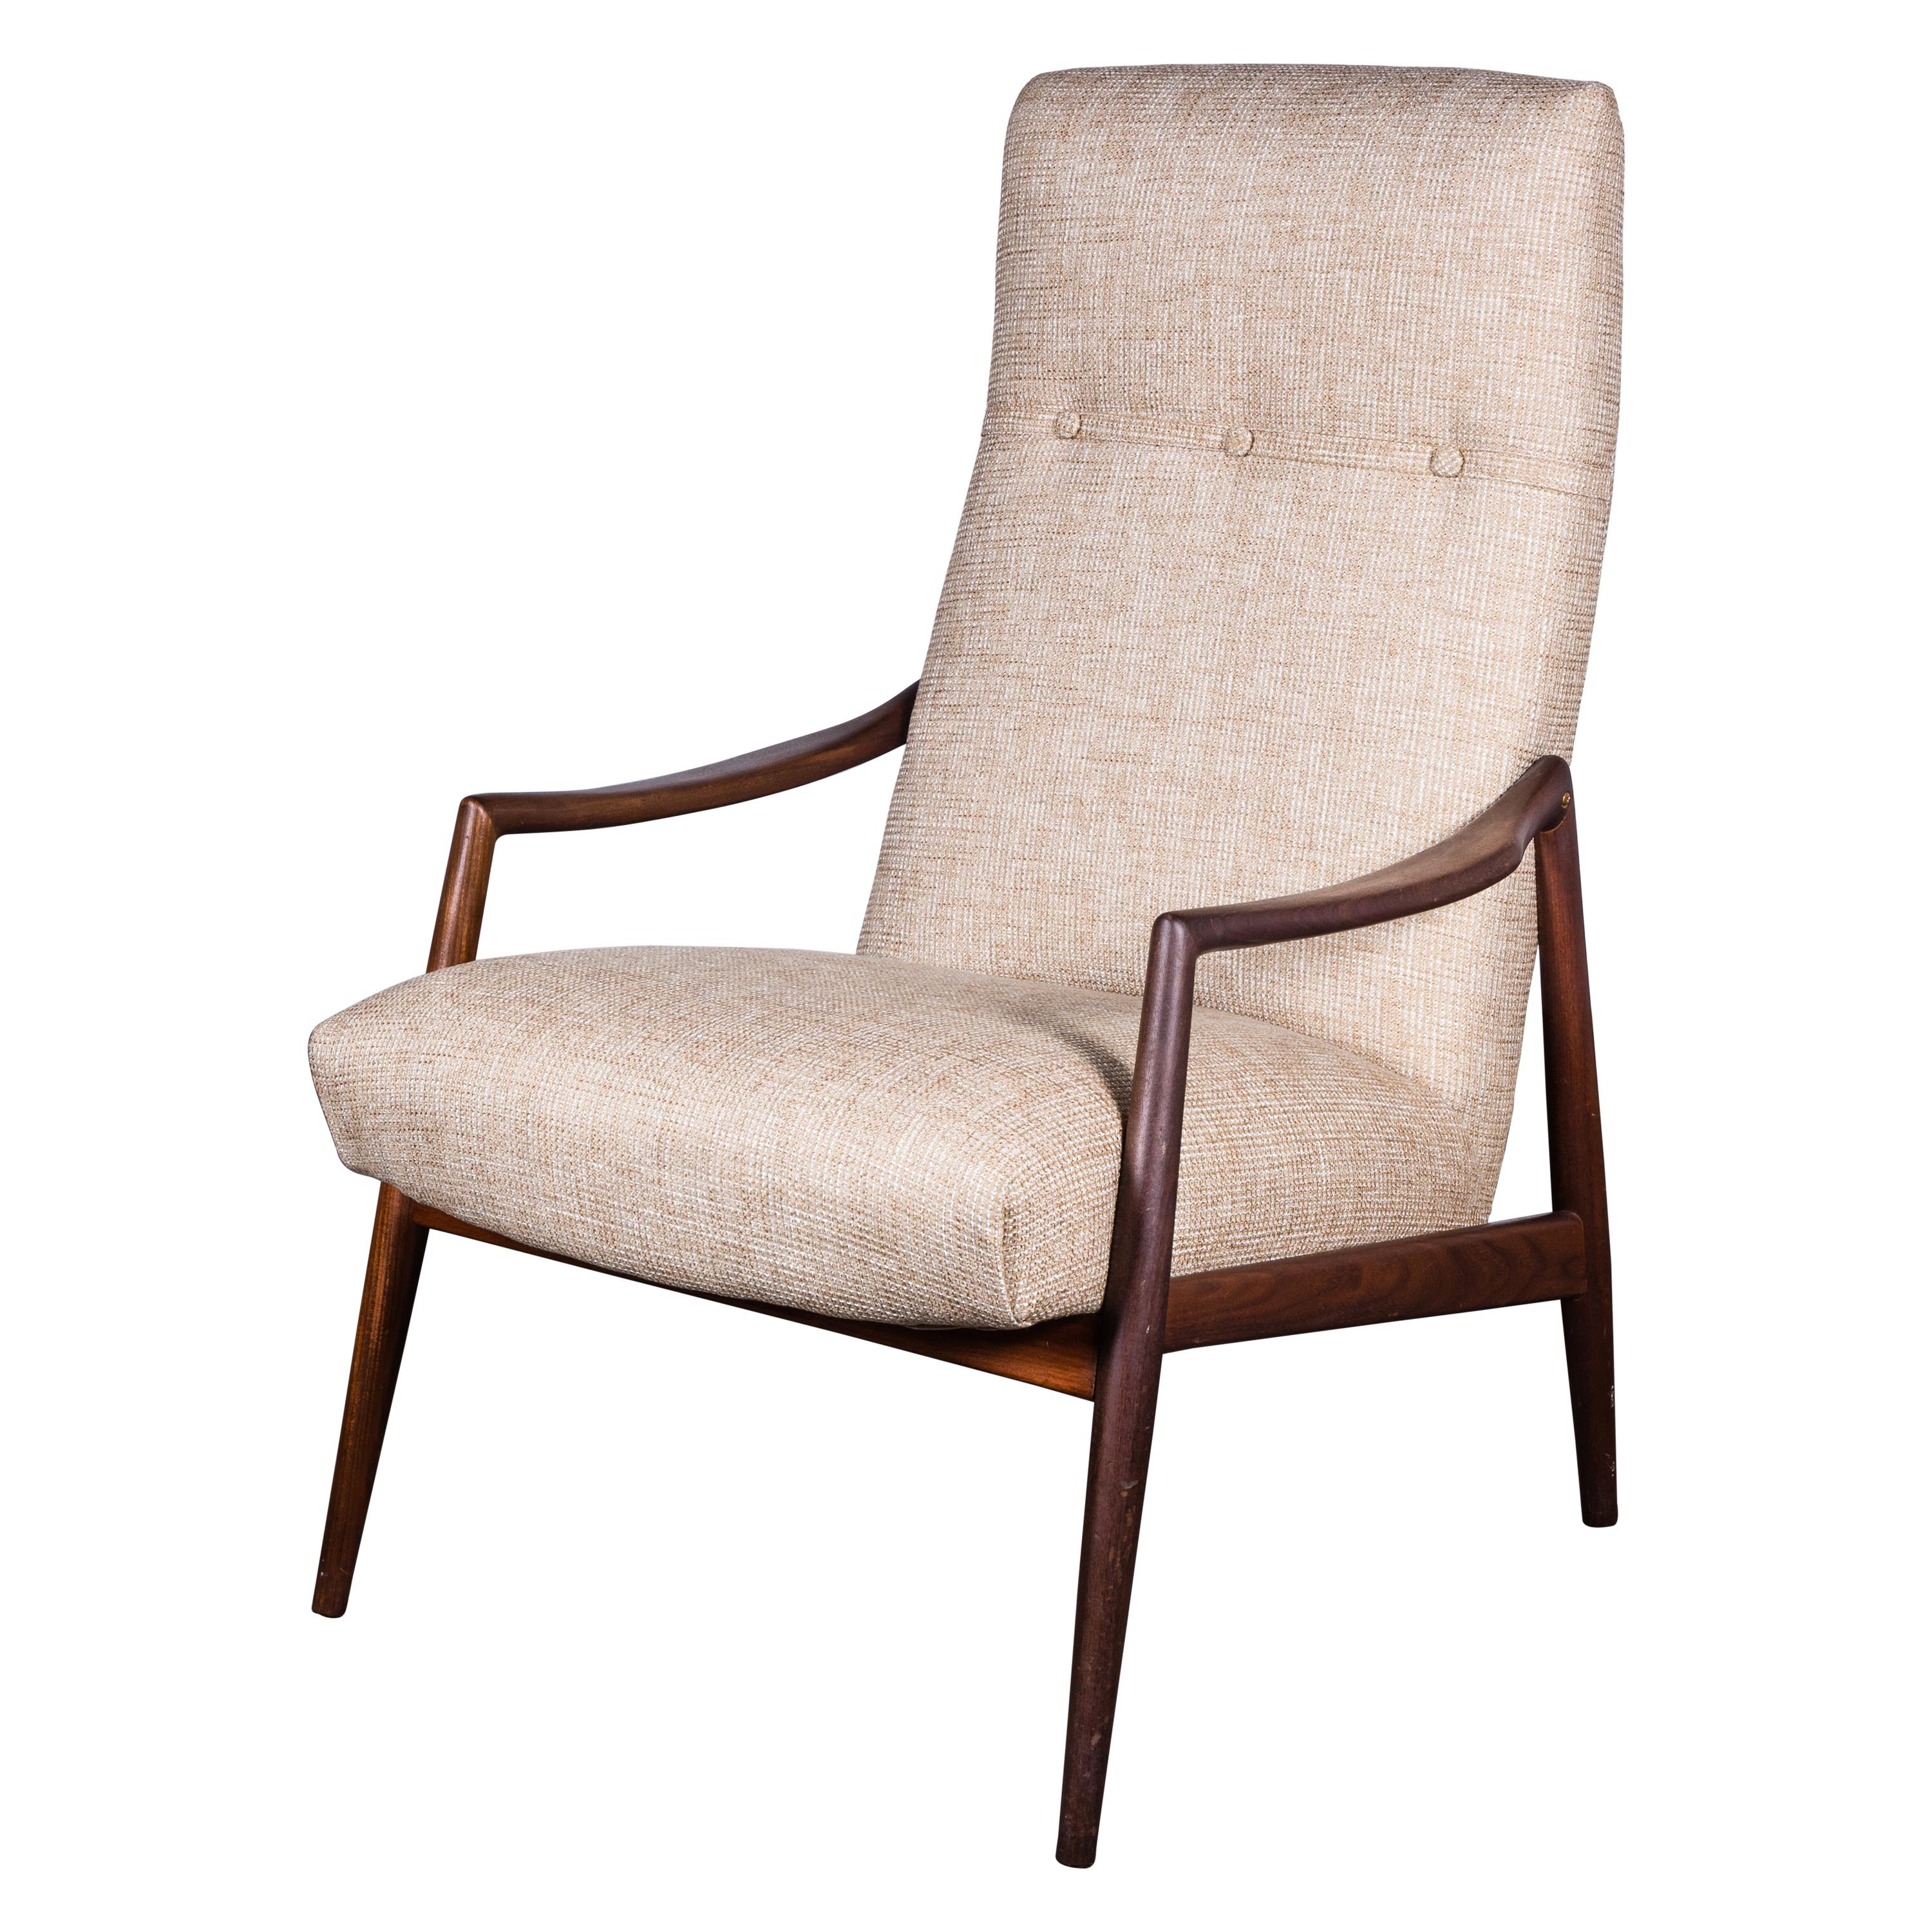 High-Back 1950s Teak Armchair by Lohmeyer upholstered à la Coco Chanel